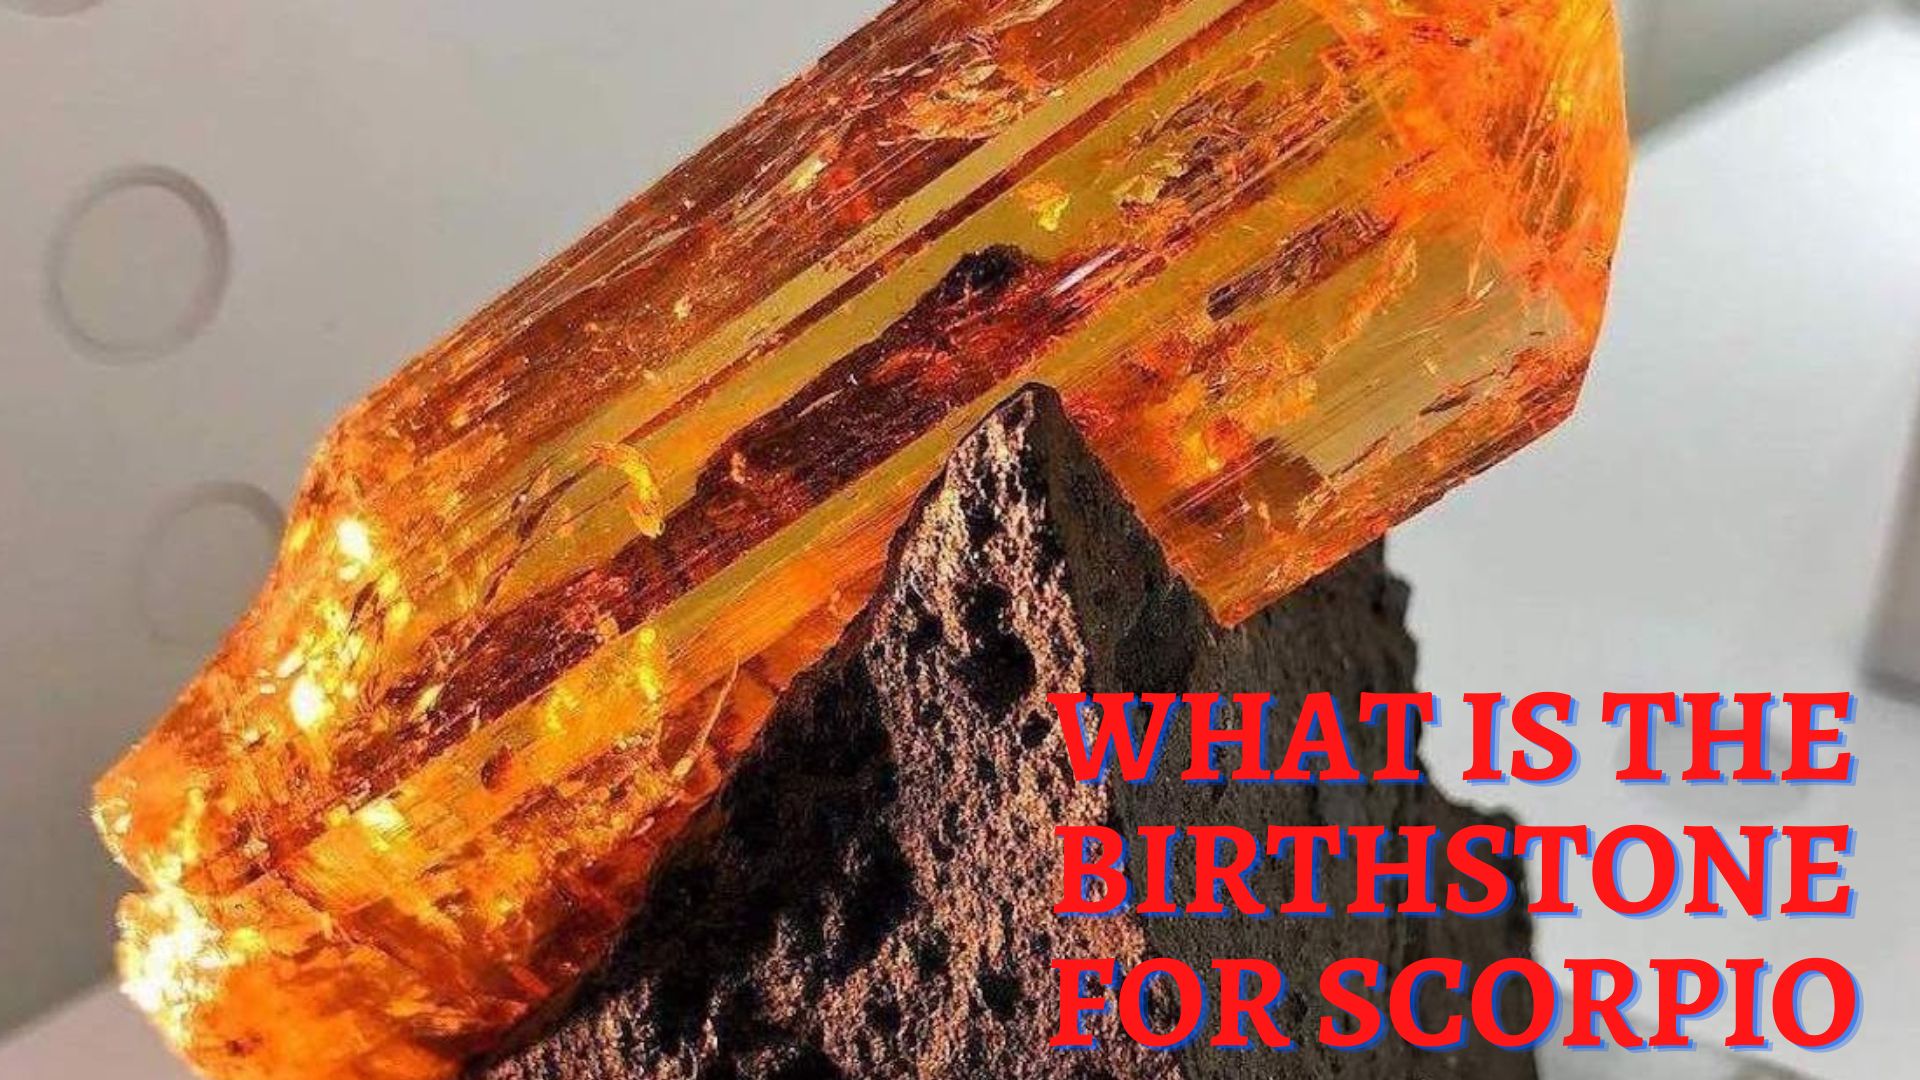 What Is The Birthstone For Scorpio?